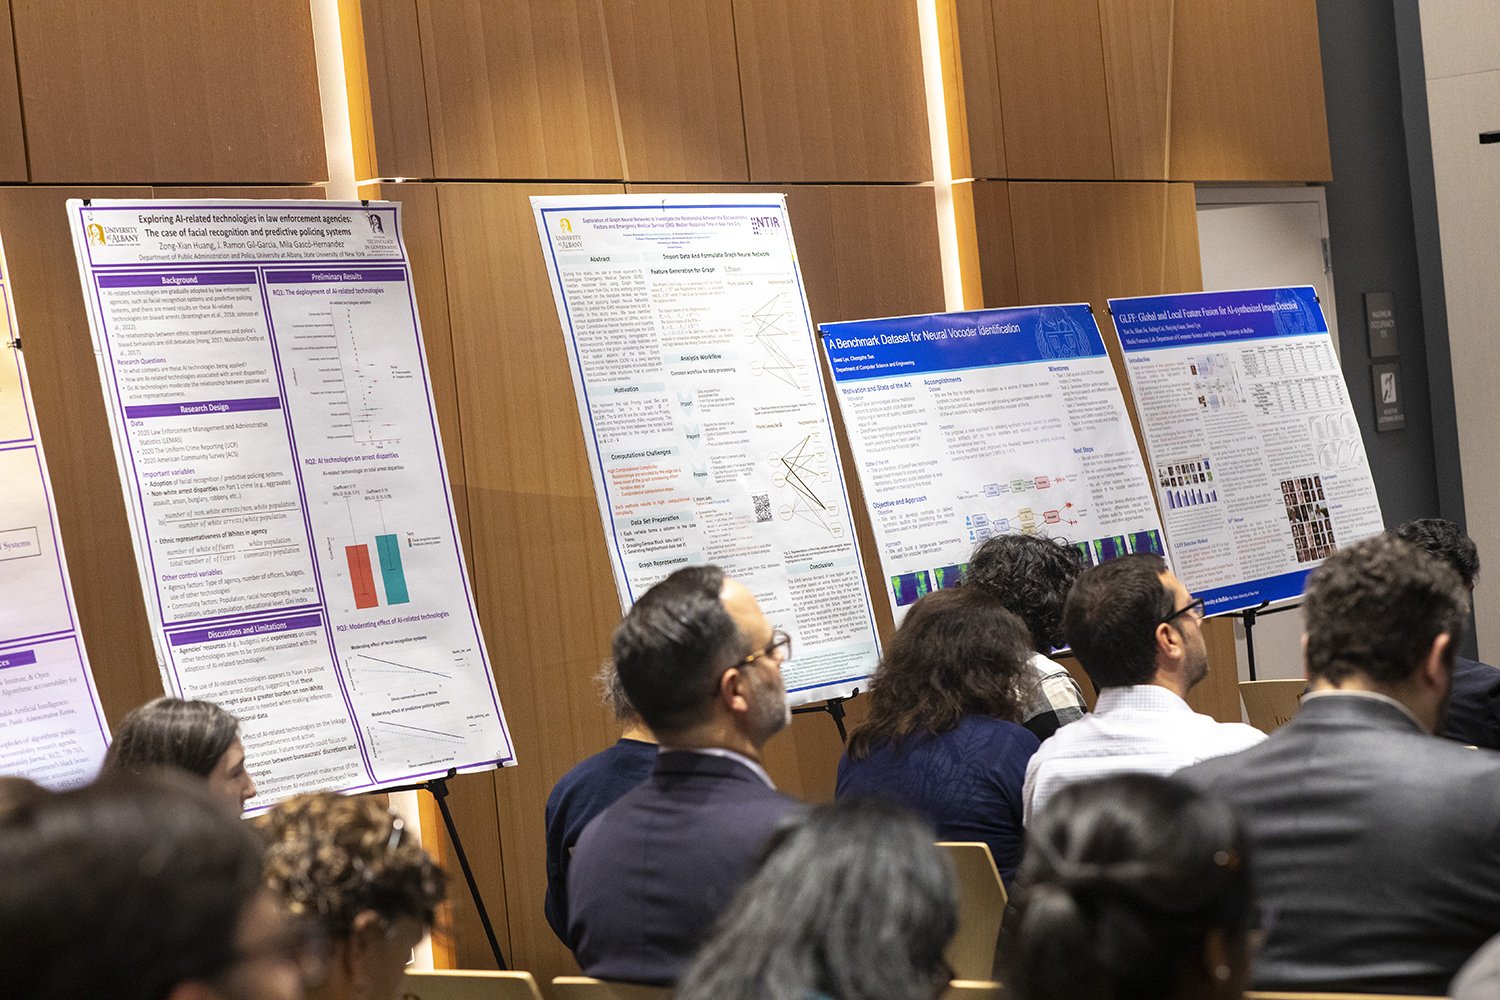 Posters from the SUNY AI Symposium on Oct. 16 at ETEC. (Photo by Patrick Dodson)